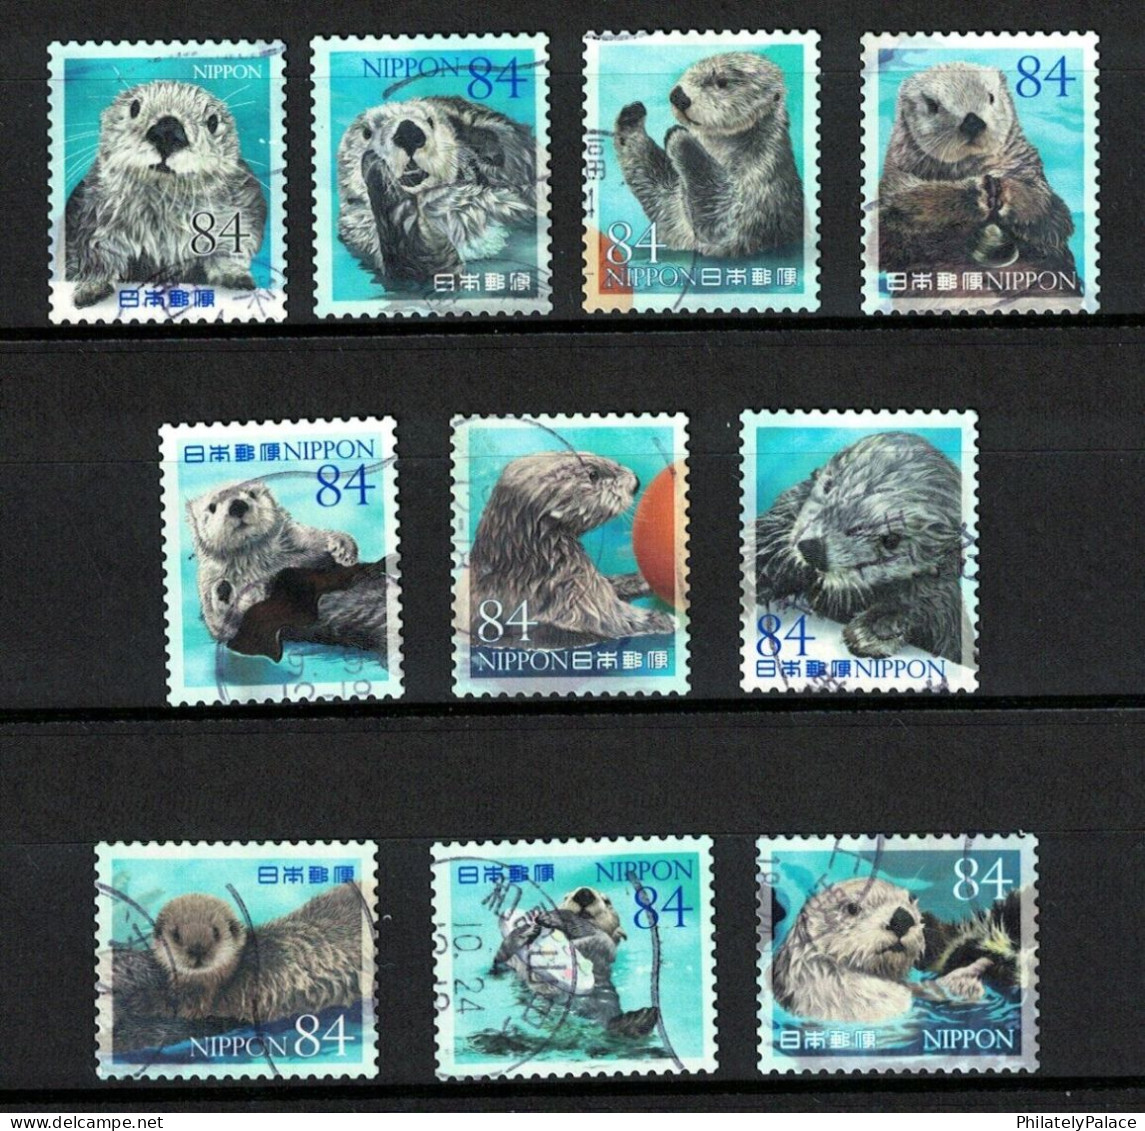 JAPAN 2022 MARINE ANIMAL LIFE PART 6 OTTER COMP. SET OF 10 STAMP IN FINE USED CONDITION (**) - Oblitérés